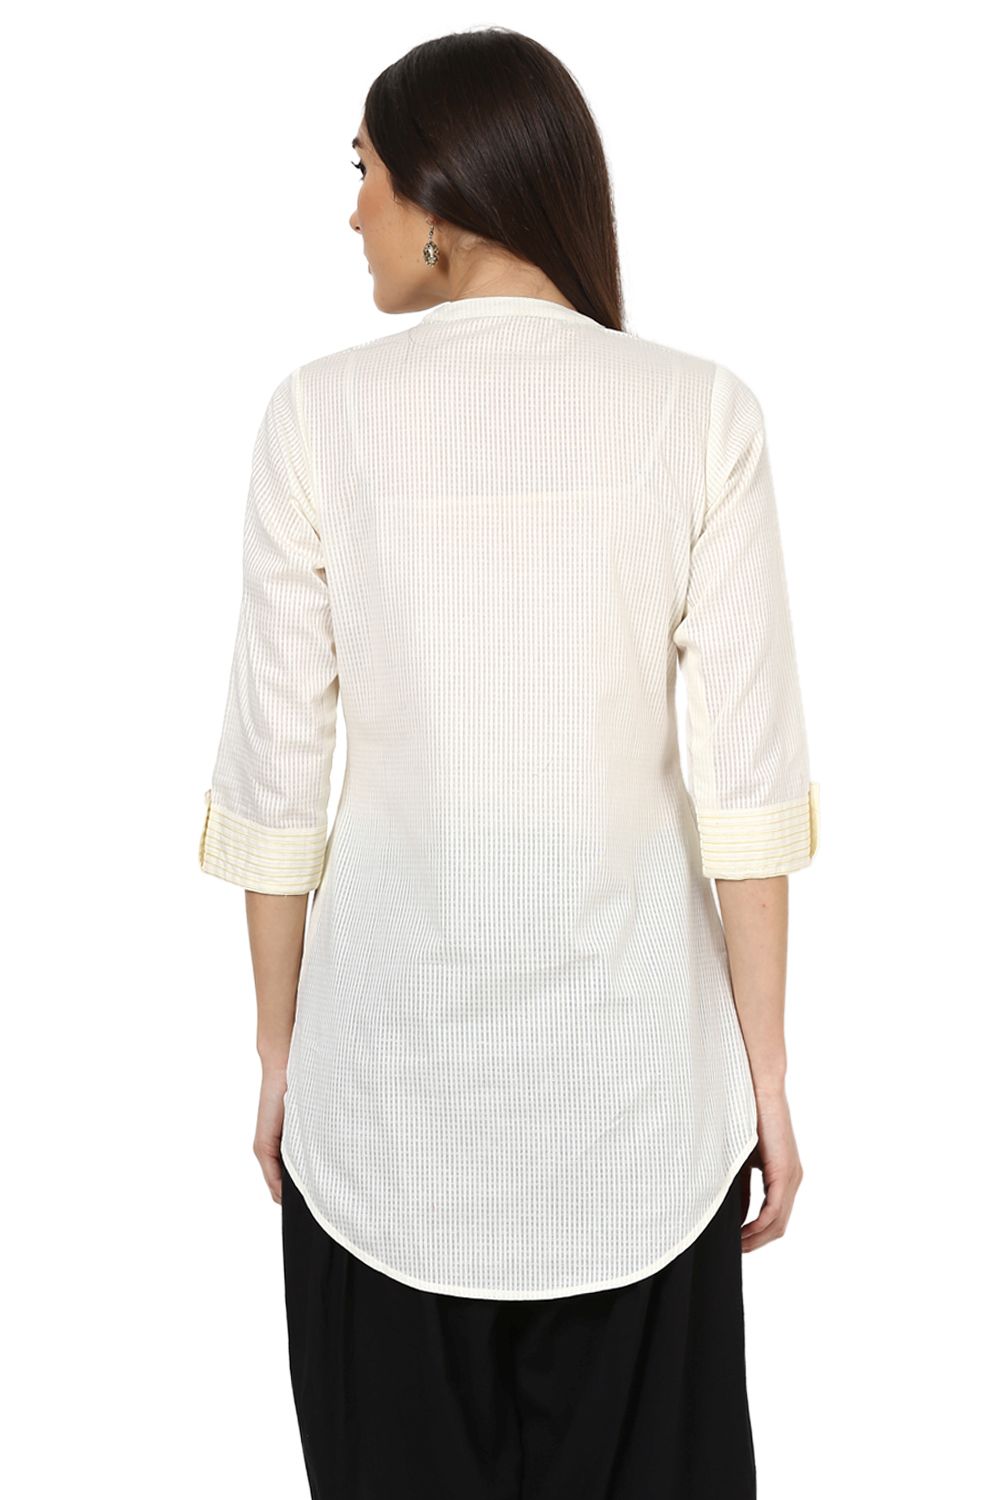 Off White Straight Cotton Indie Top image number 4